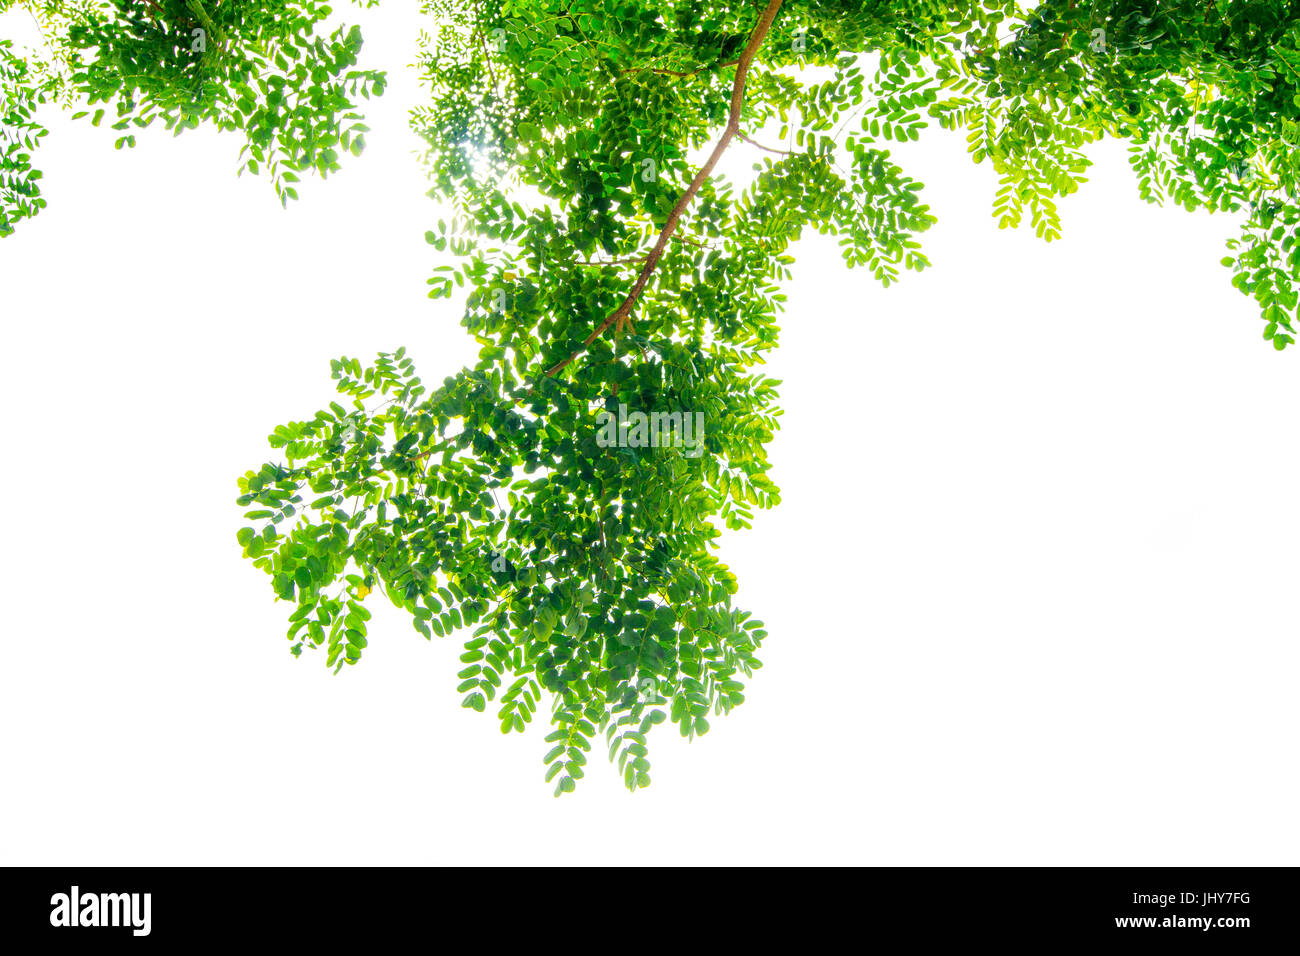 The branches and leaves are green on a white background,Clipping Path. Stock Photo